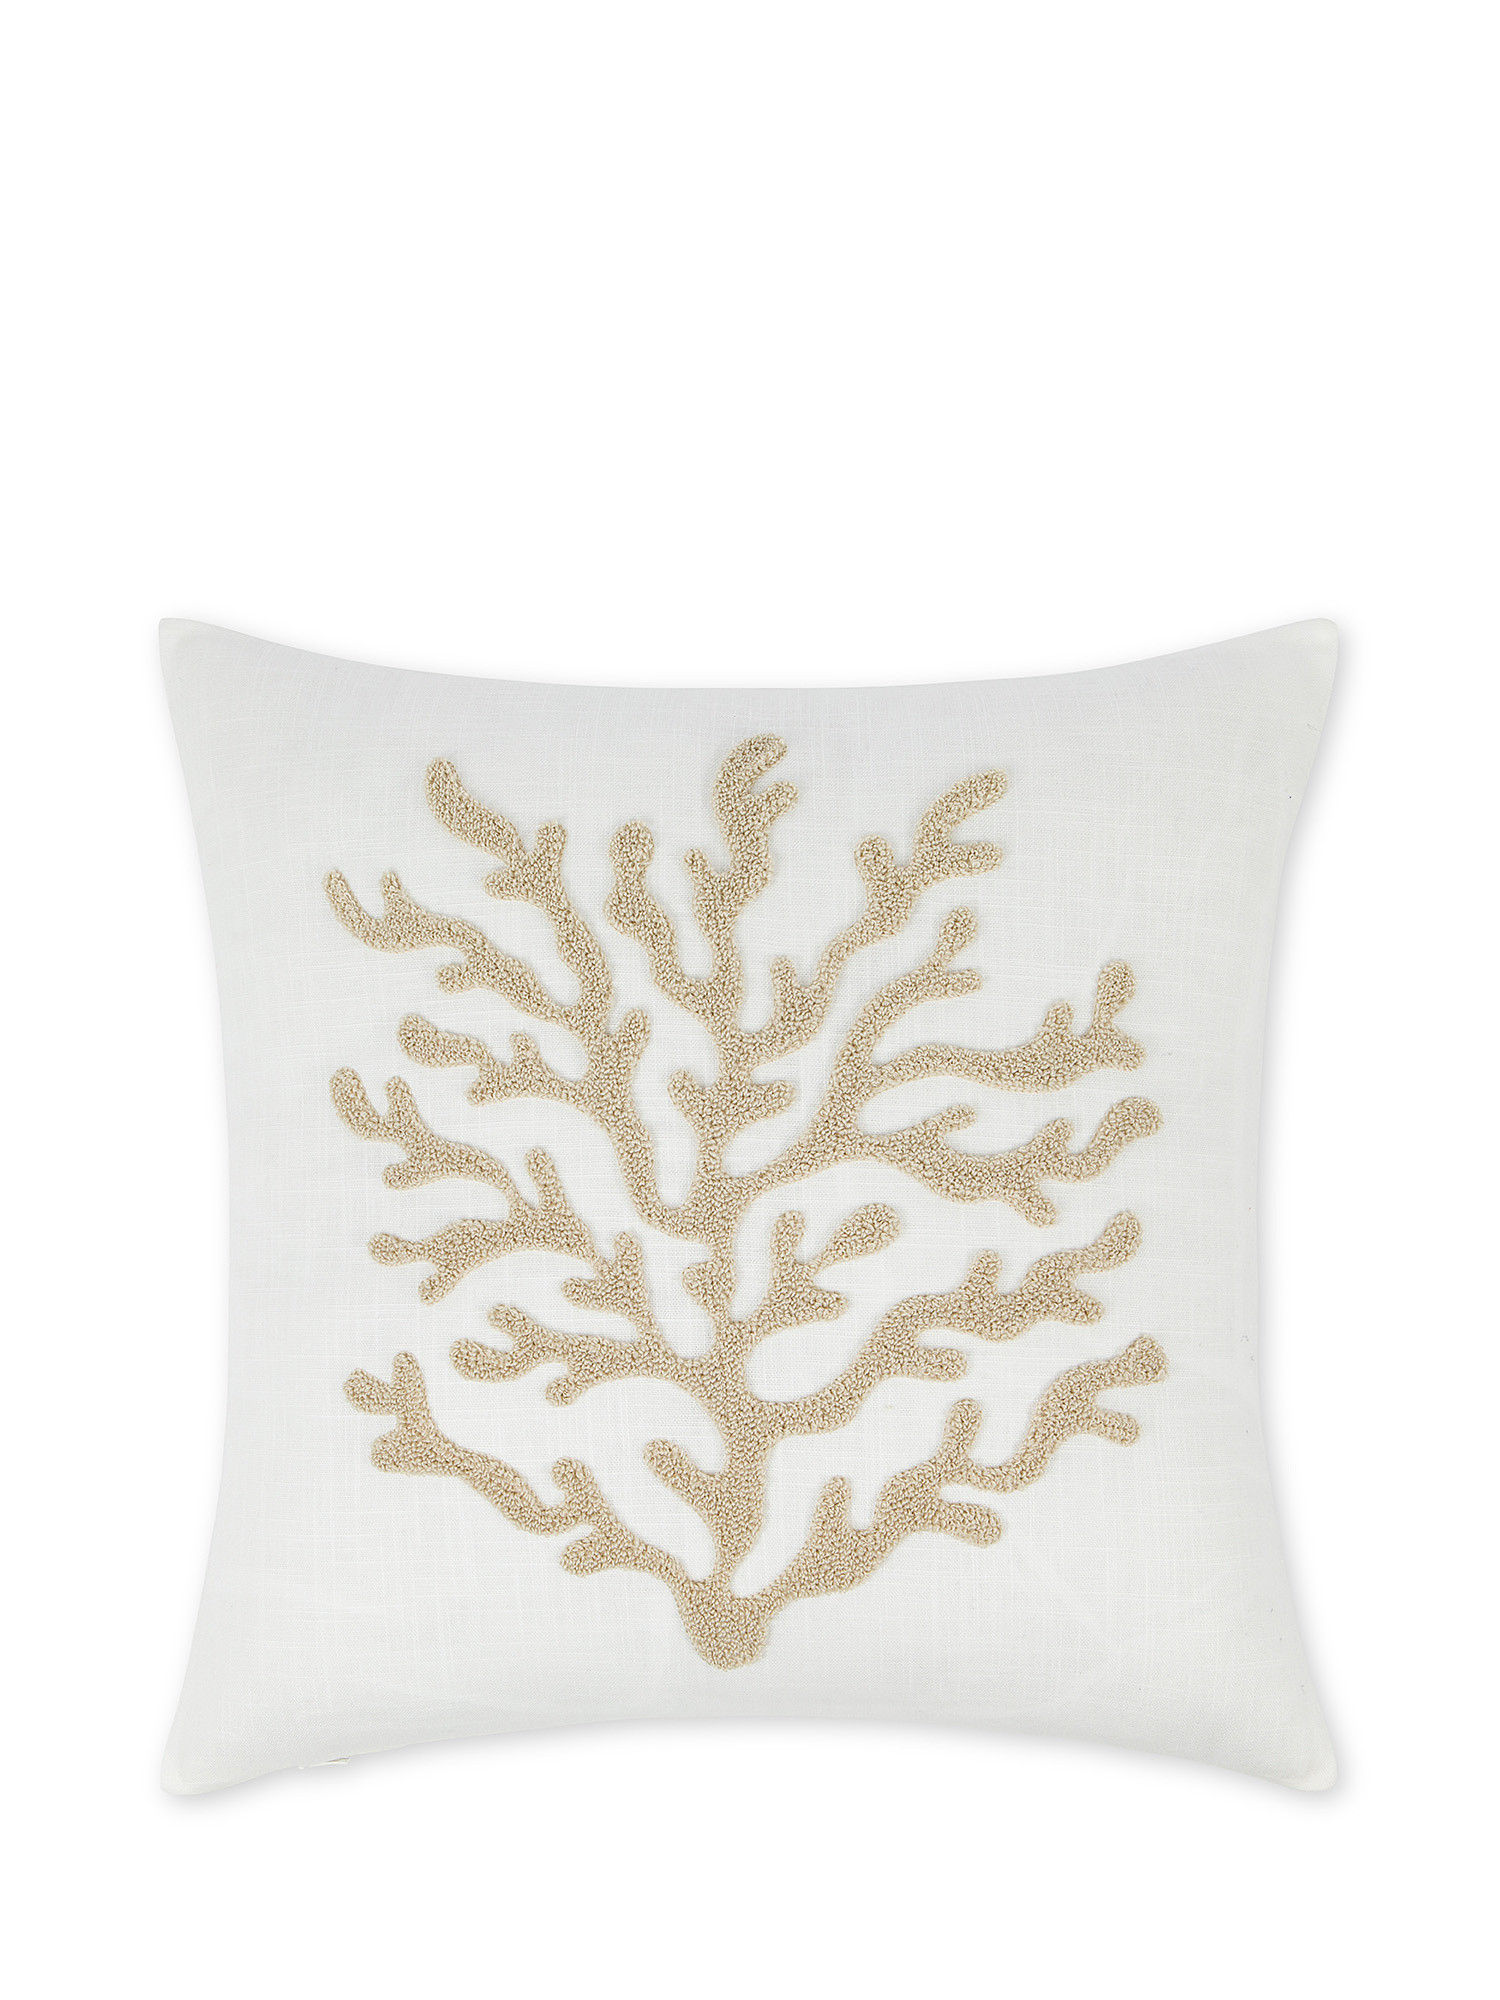 Cushion 45x45 cm with coral decoration, White / Beige, large image number 0